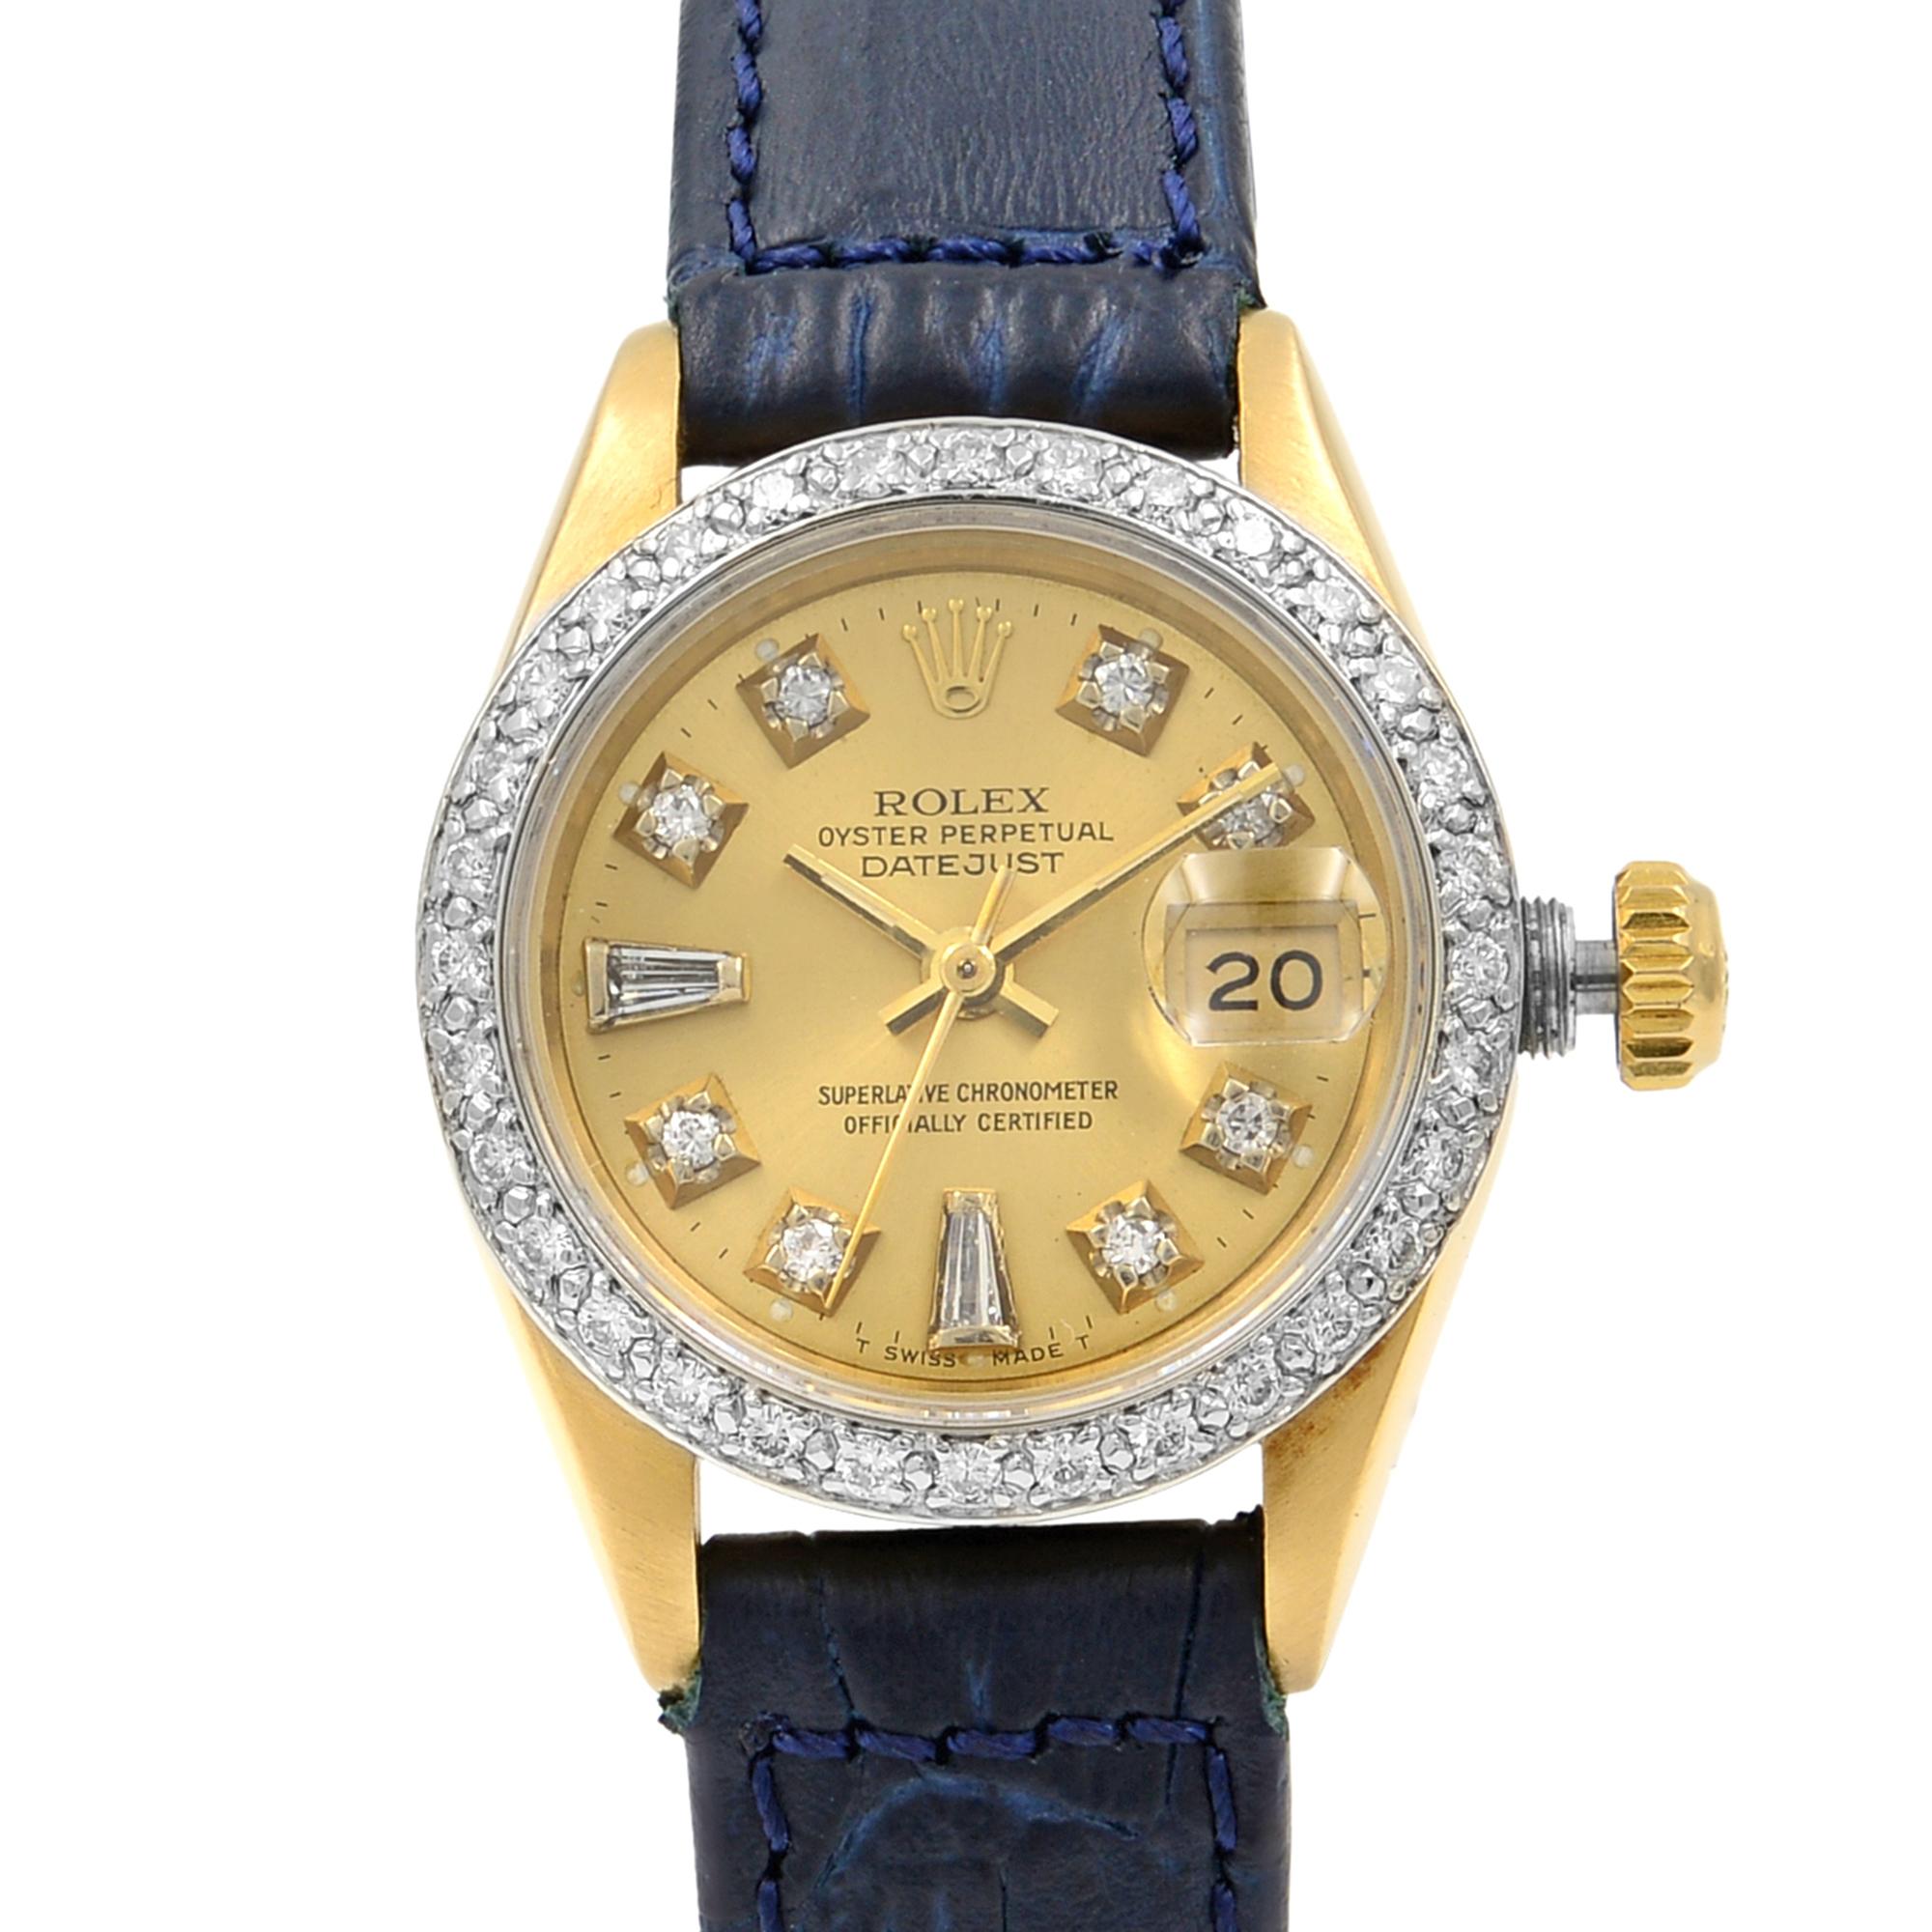 This pre-owned Rolex Datejust  69278 is a beautiful Ladies timepiece that is powered by an automatic movement which is cased in a yellow gold case. It has a round shape face, date, diamonds dial and has hand diamonds style markers. It is completed